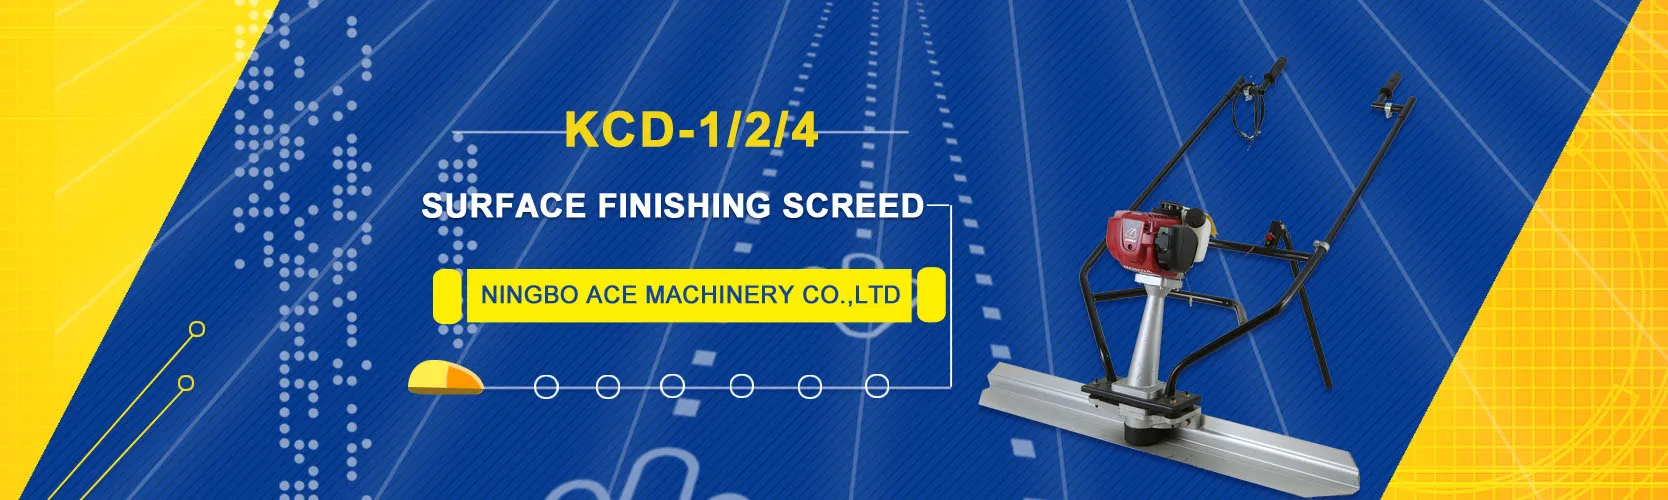 KCD gasoline air-cooled 4-cycle surface finishing screed